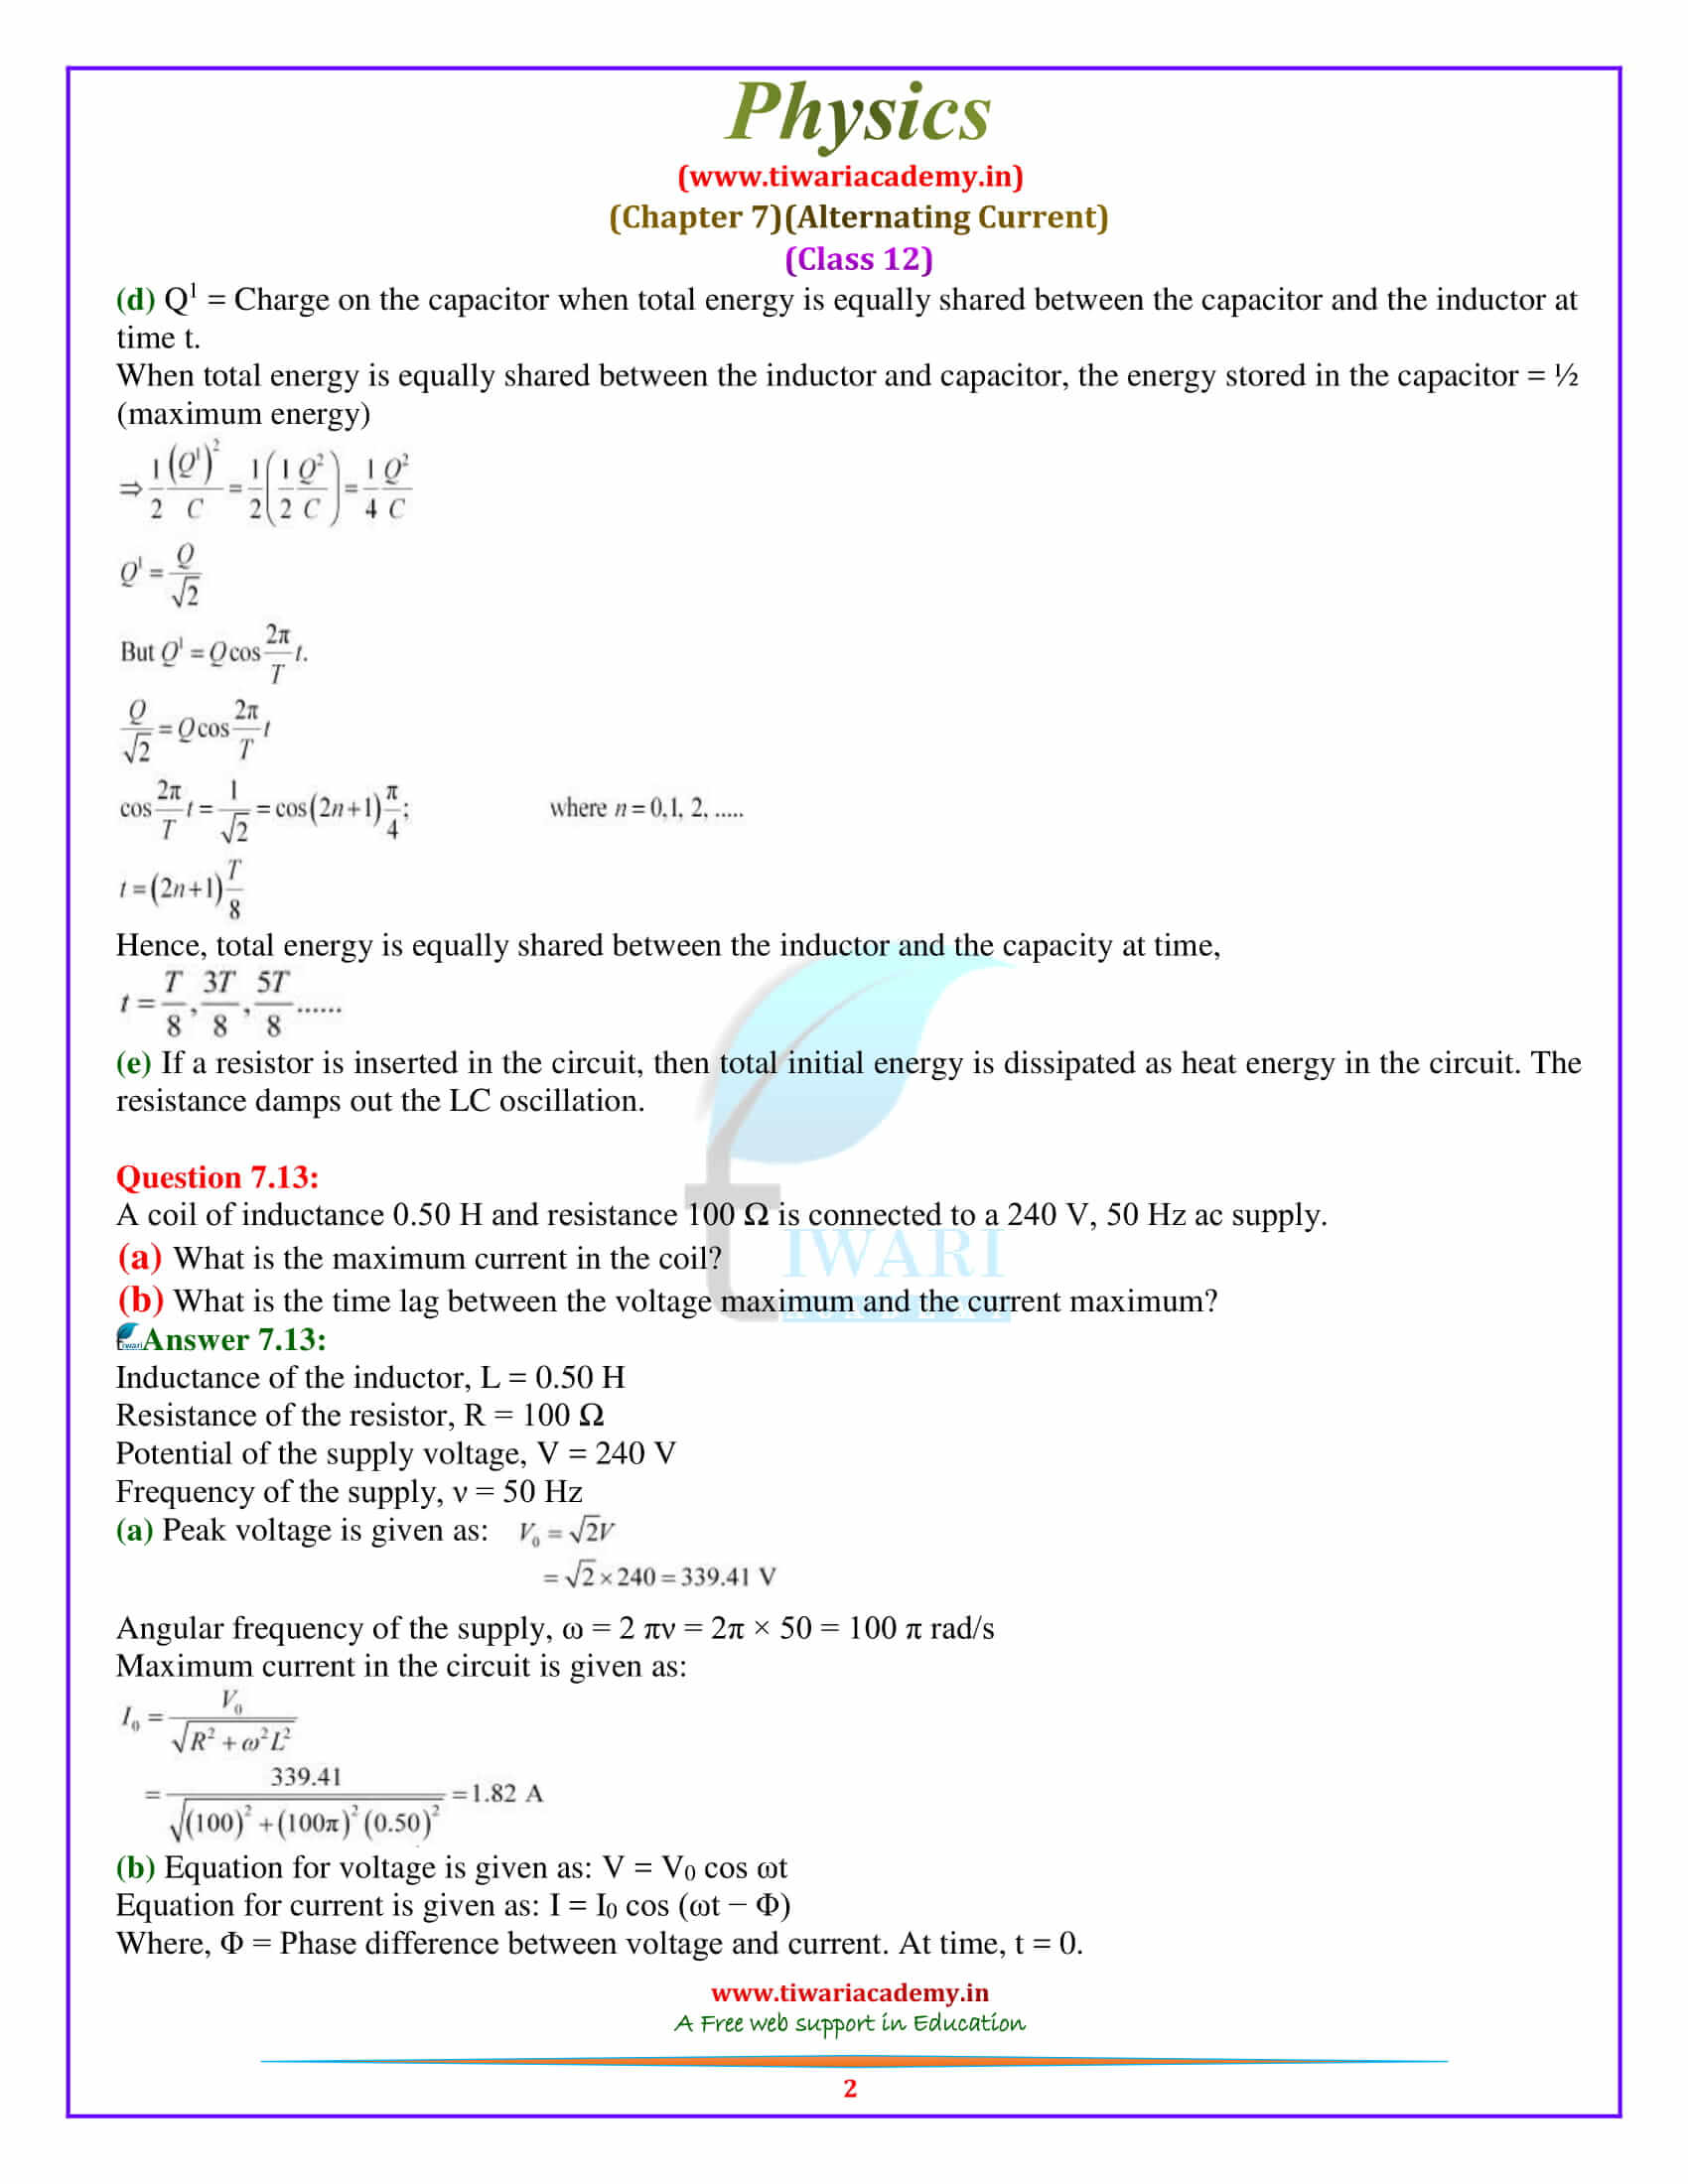 12 Physics Chapter 7 Alternating Current additional exercises answers in pdf free